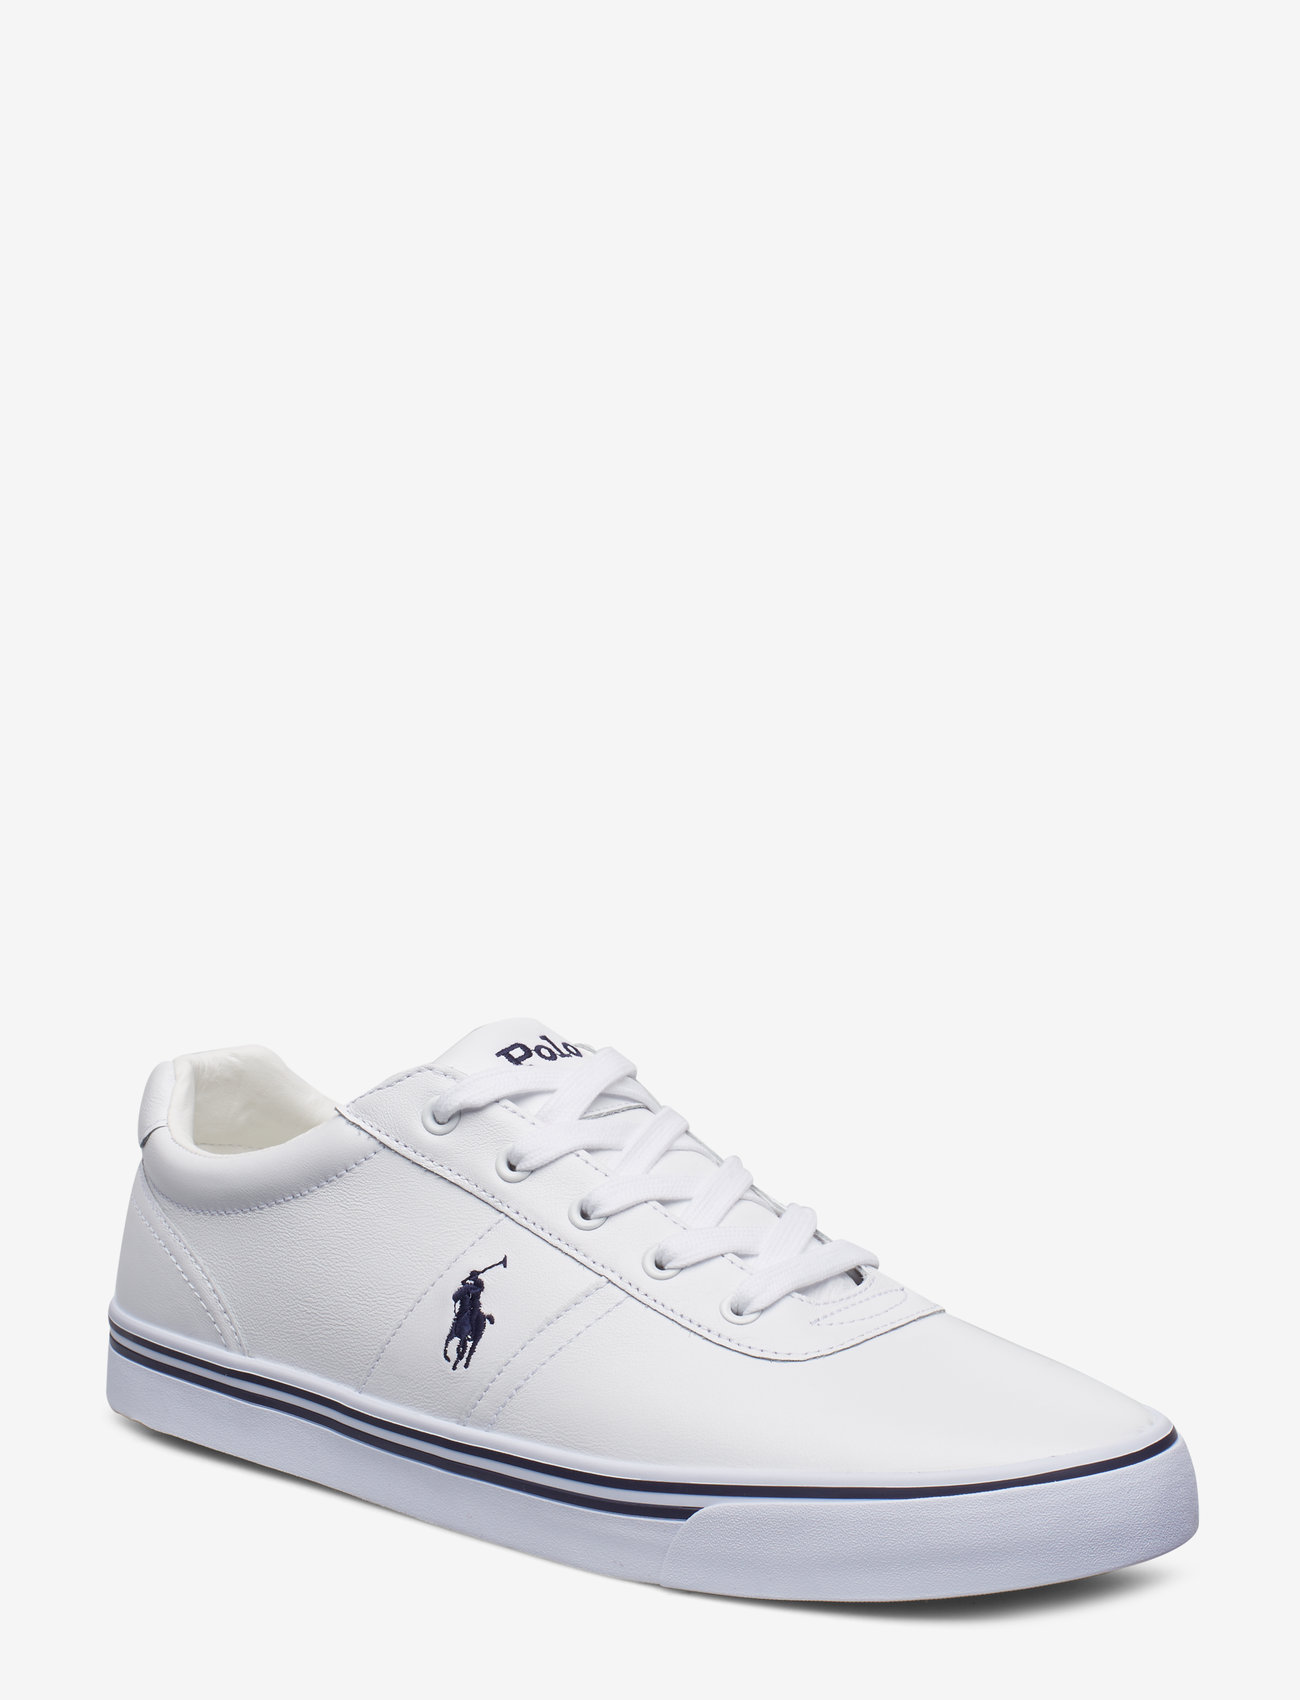 Polo Ralph Lauren - Hanford Leather Sneaker - low tops - white - 0